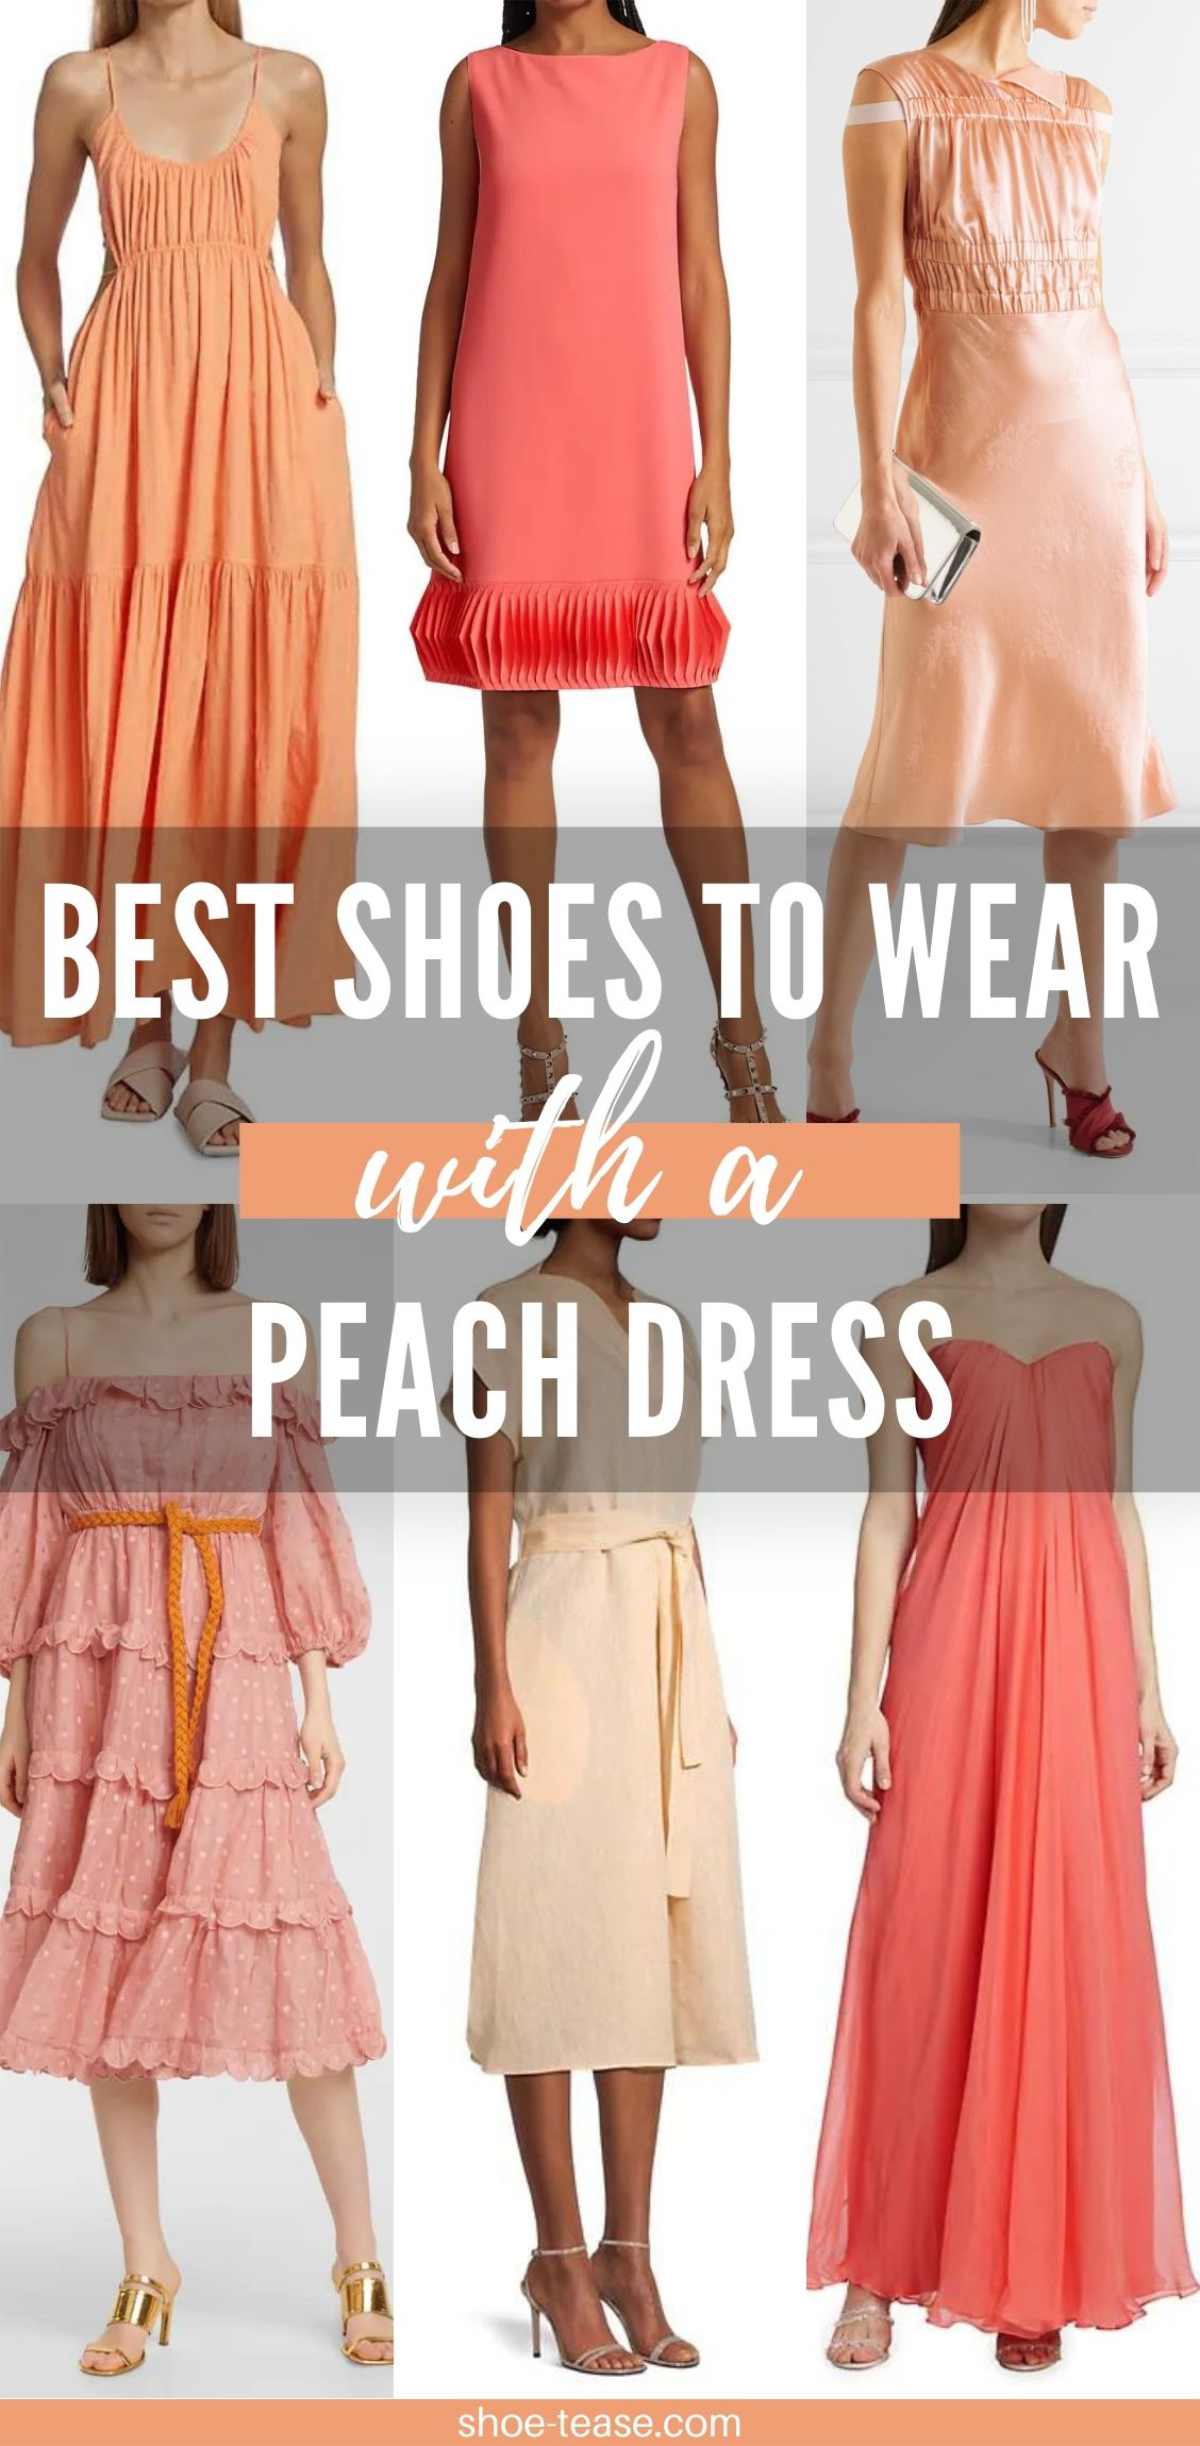 6 women wearing different color shoes with peach dress outfits.